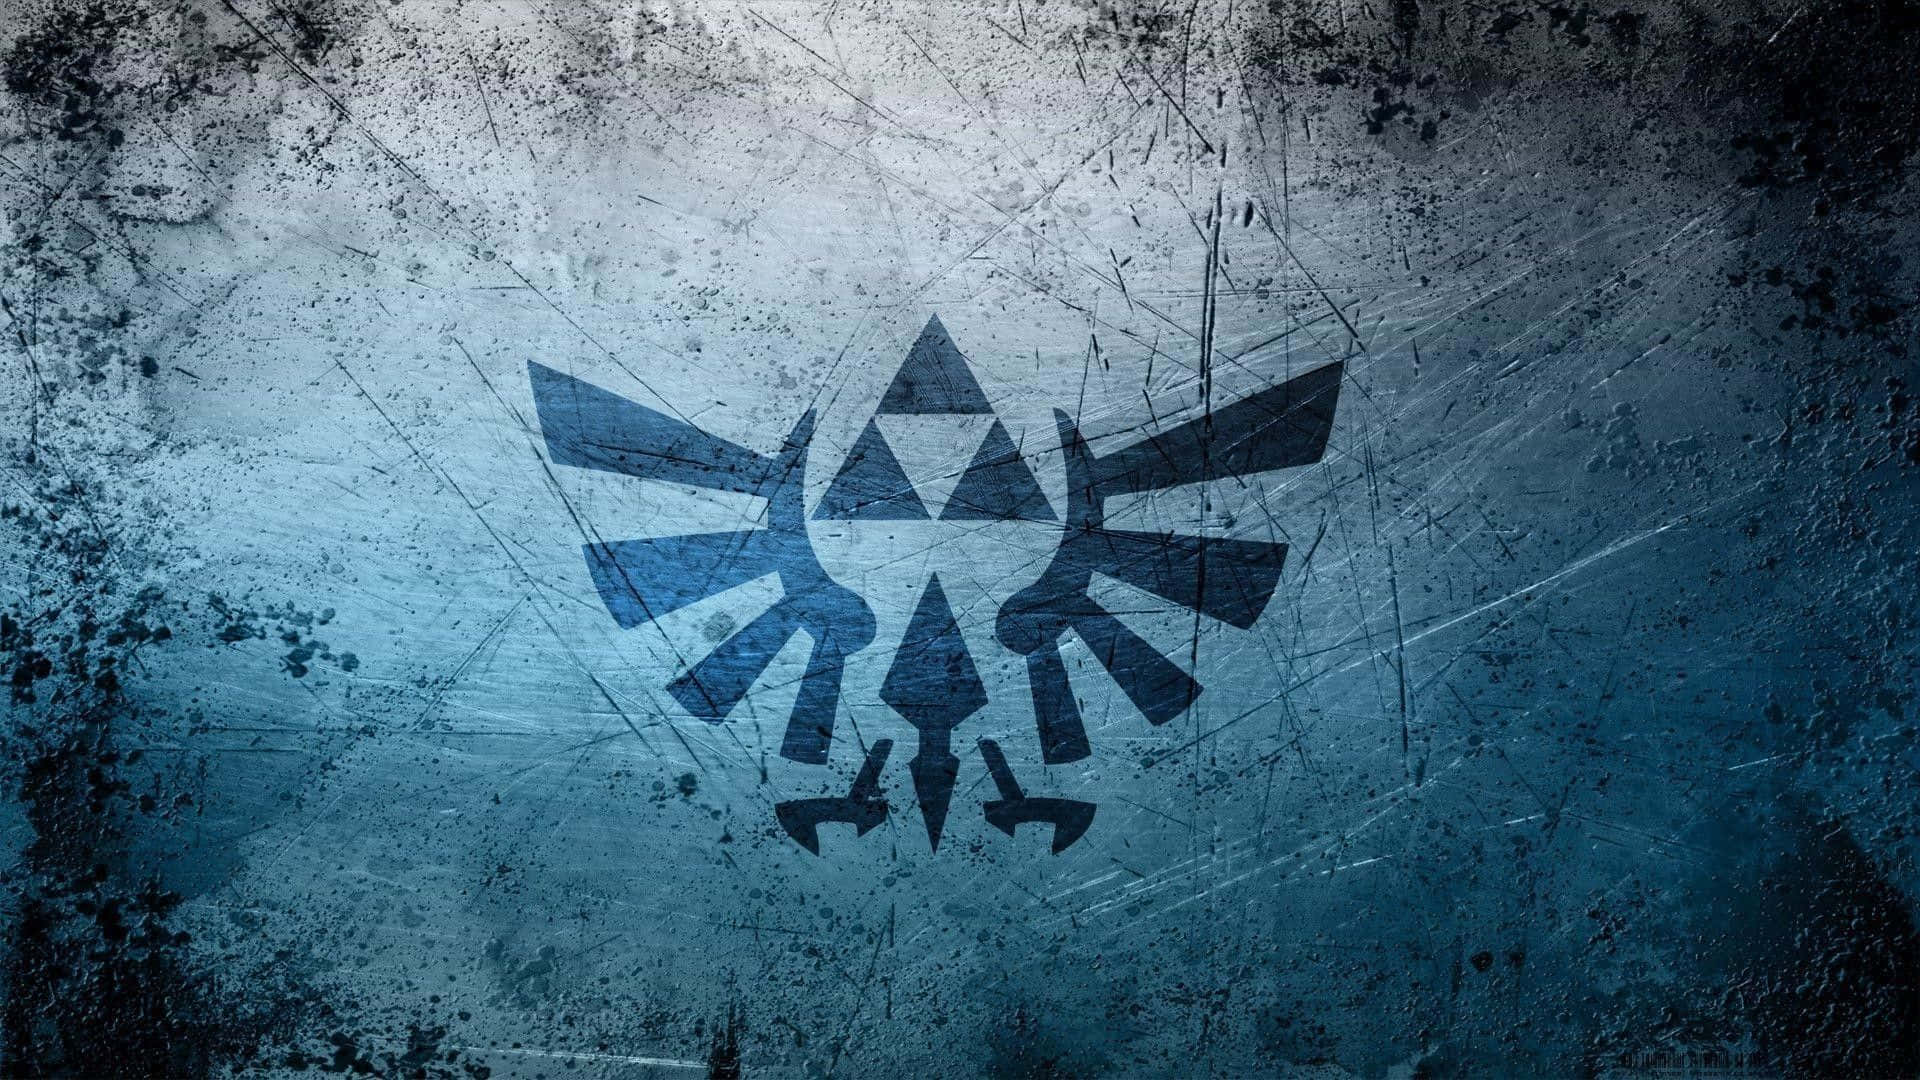 Three sacred triangles of power and wisdom, forming the iconic Triforce. Wallpaper